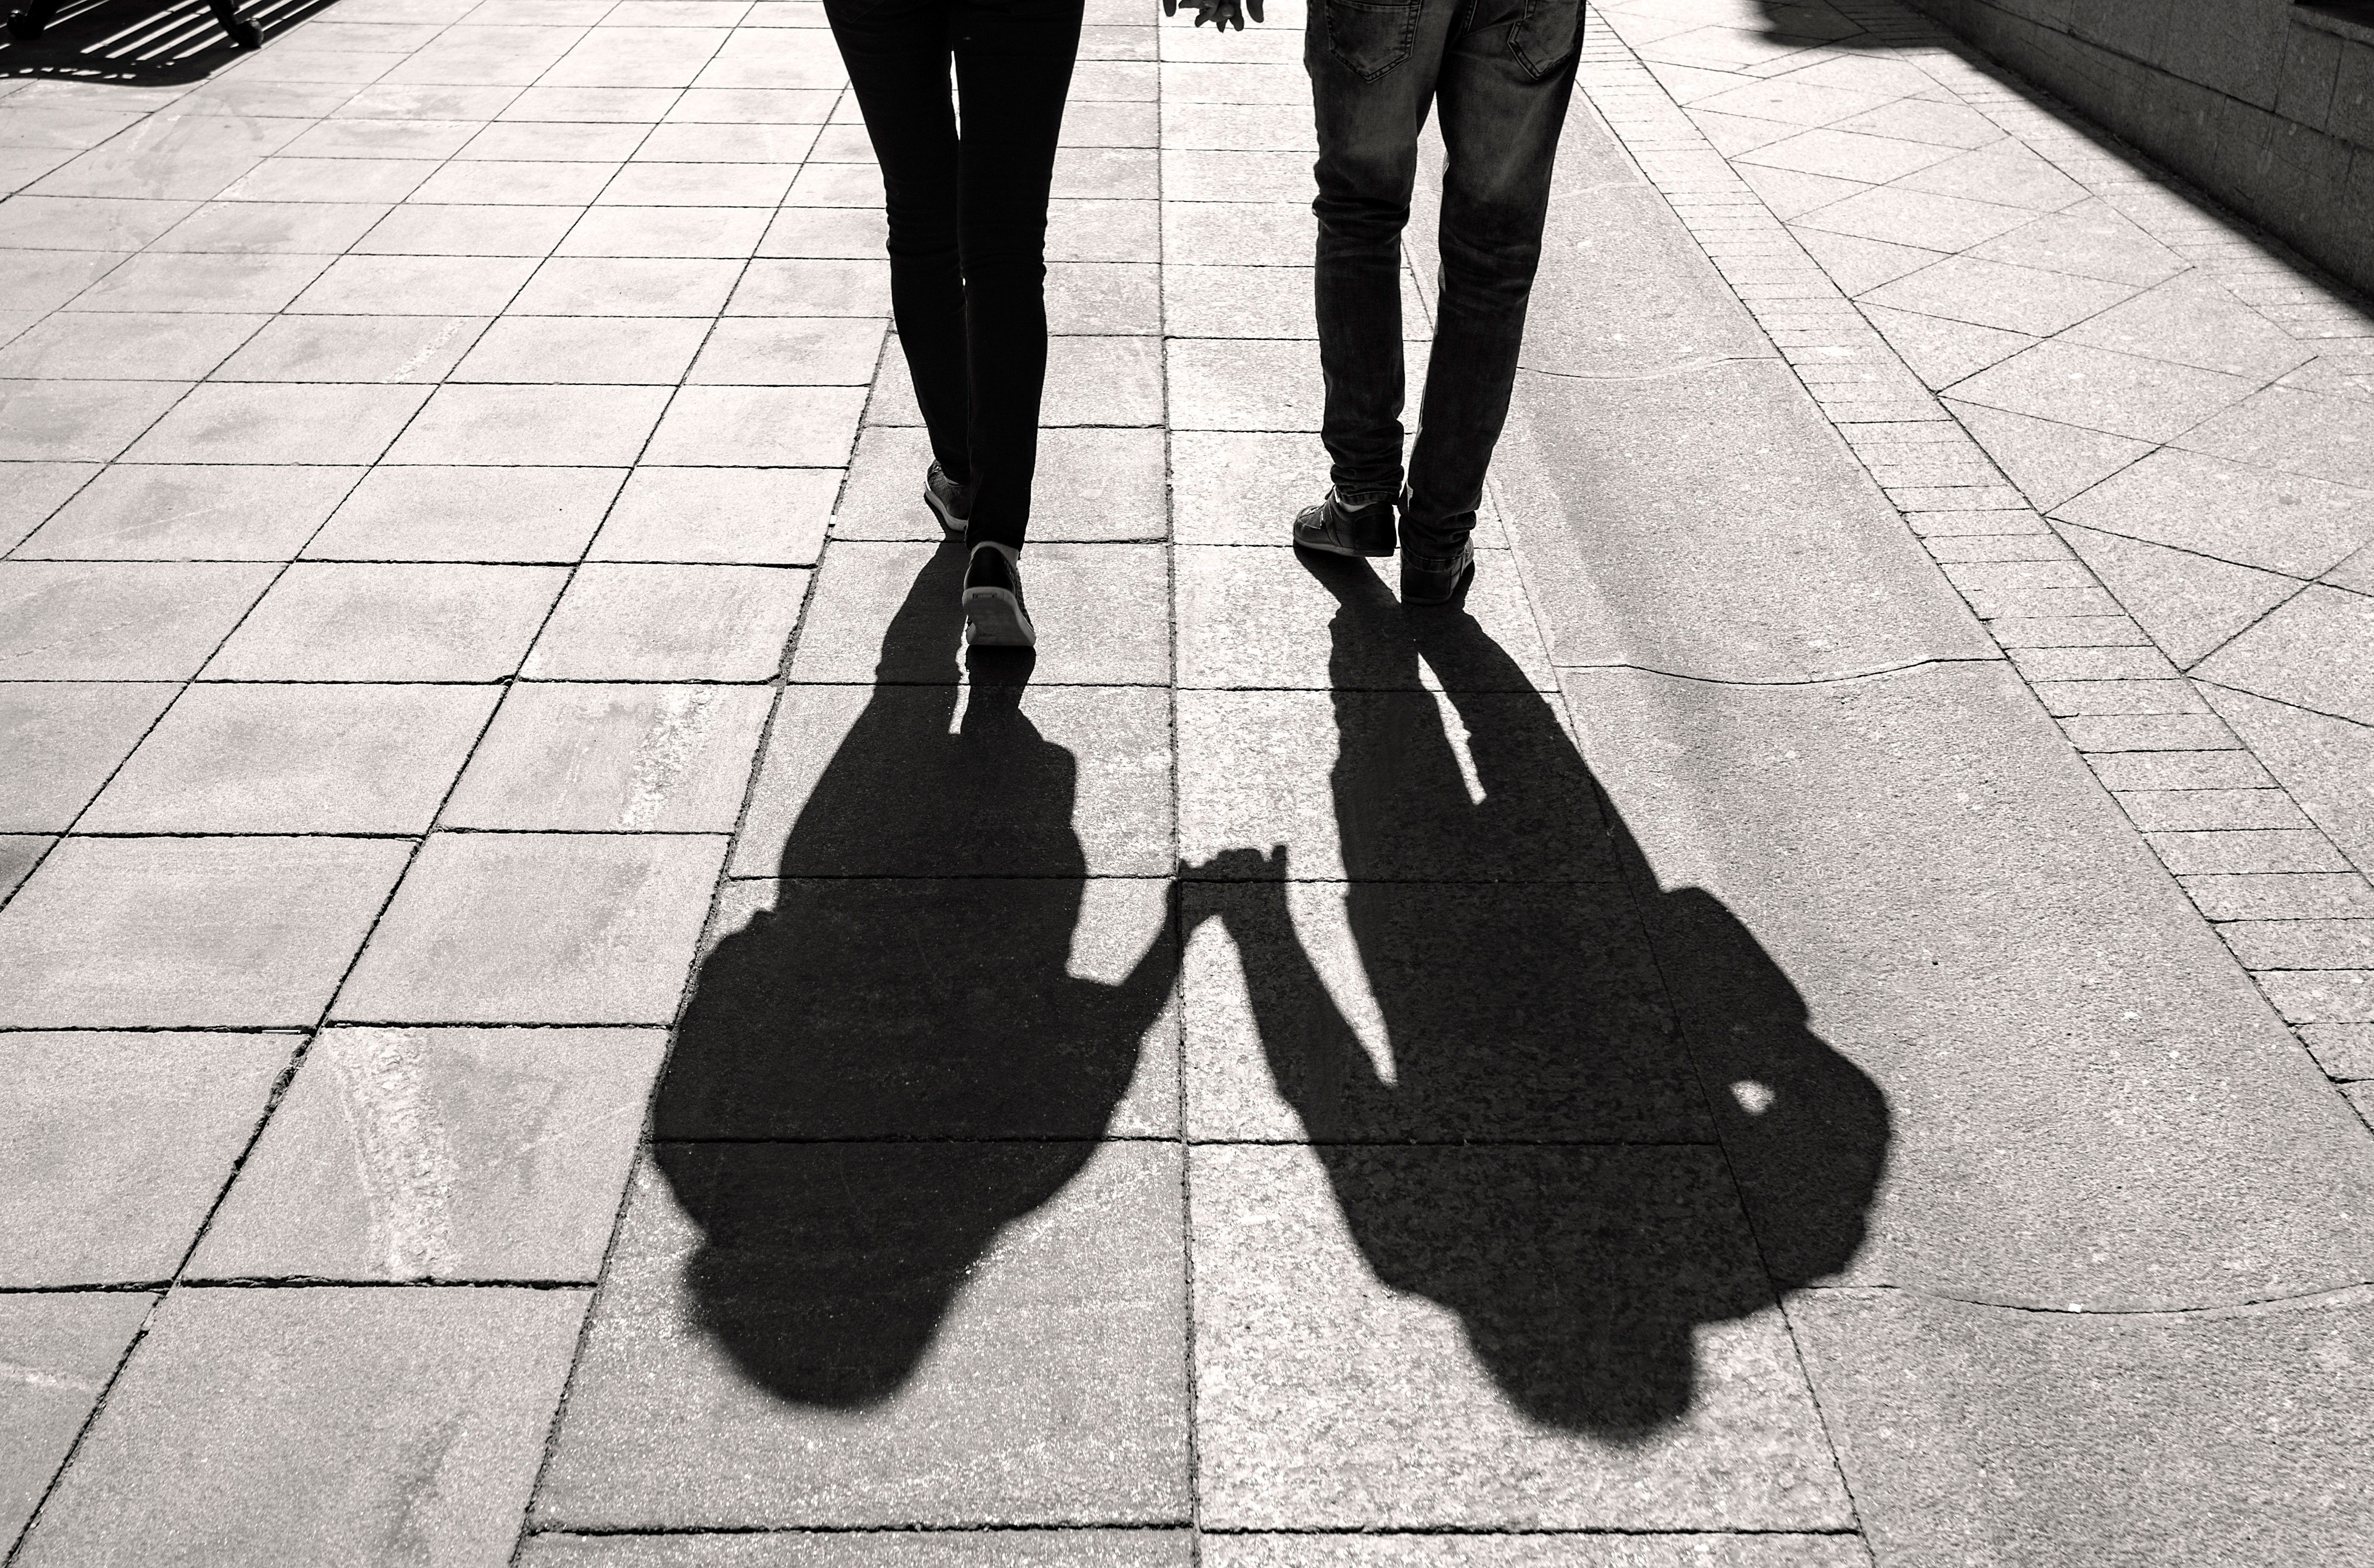 Shadows of a couple walking | Source: Shutterstock